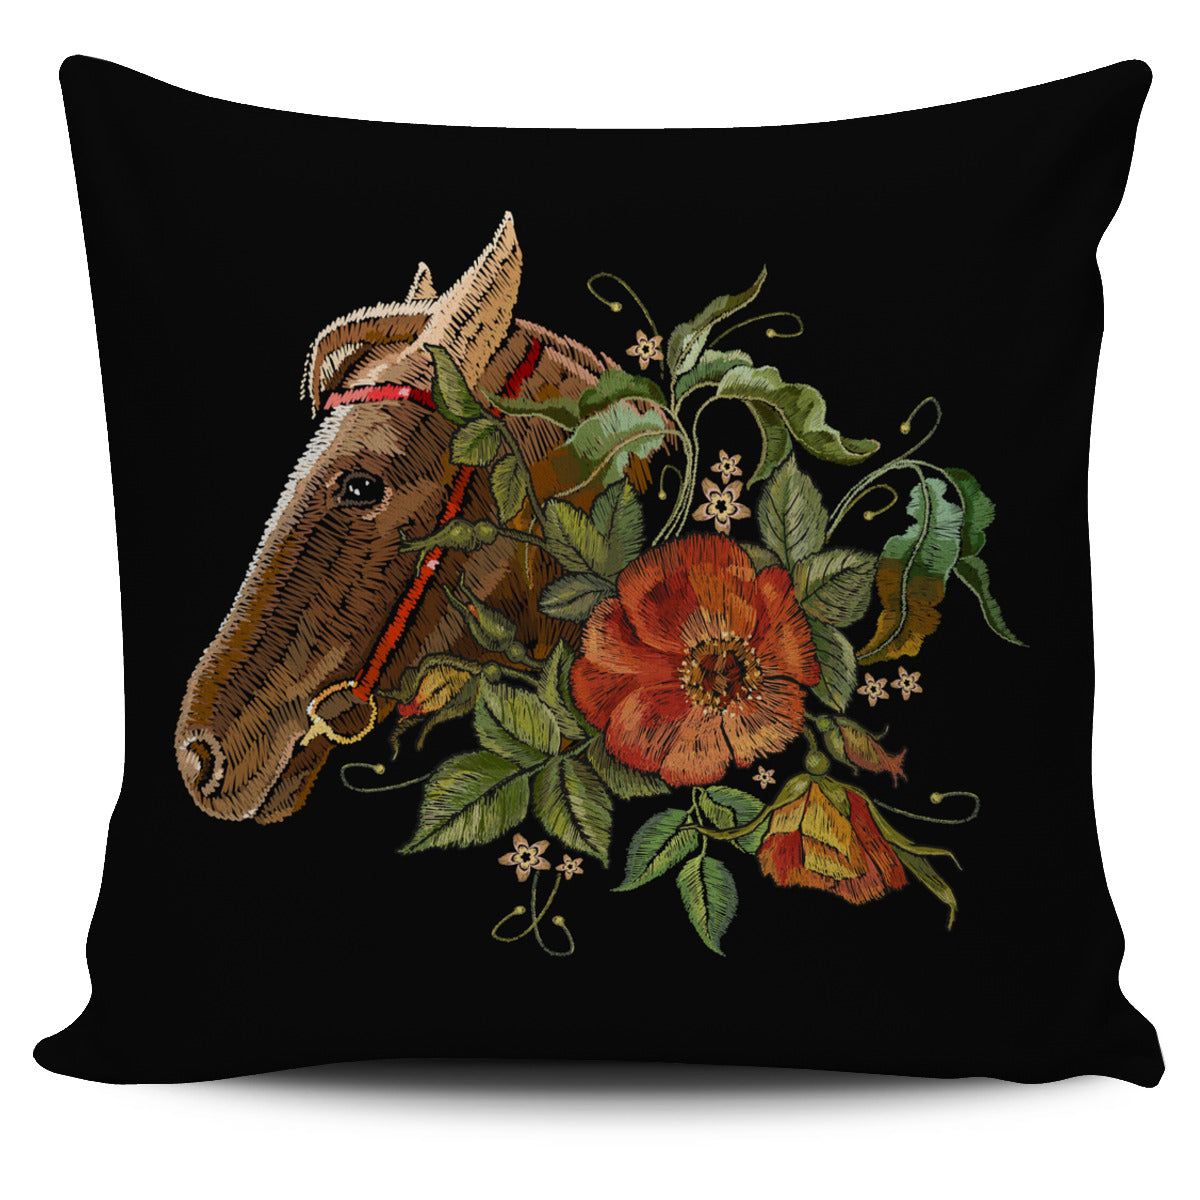 Embroidery Horse Pillow Cover